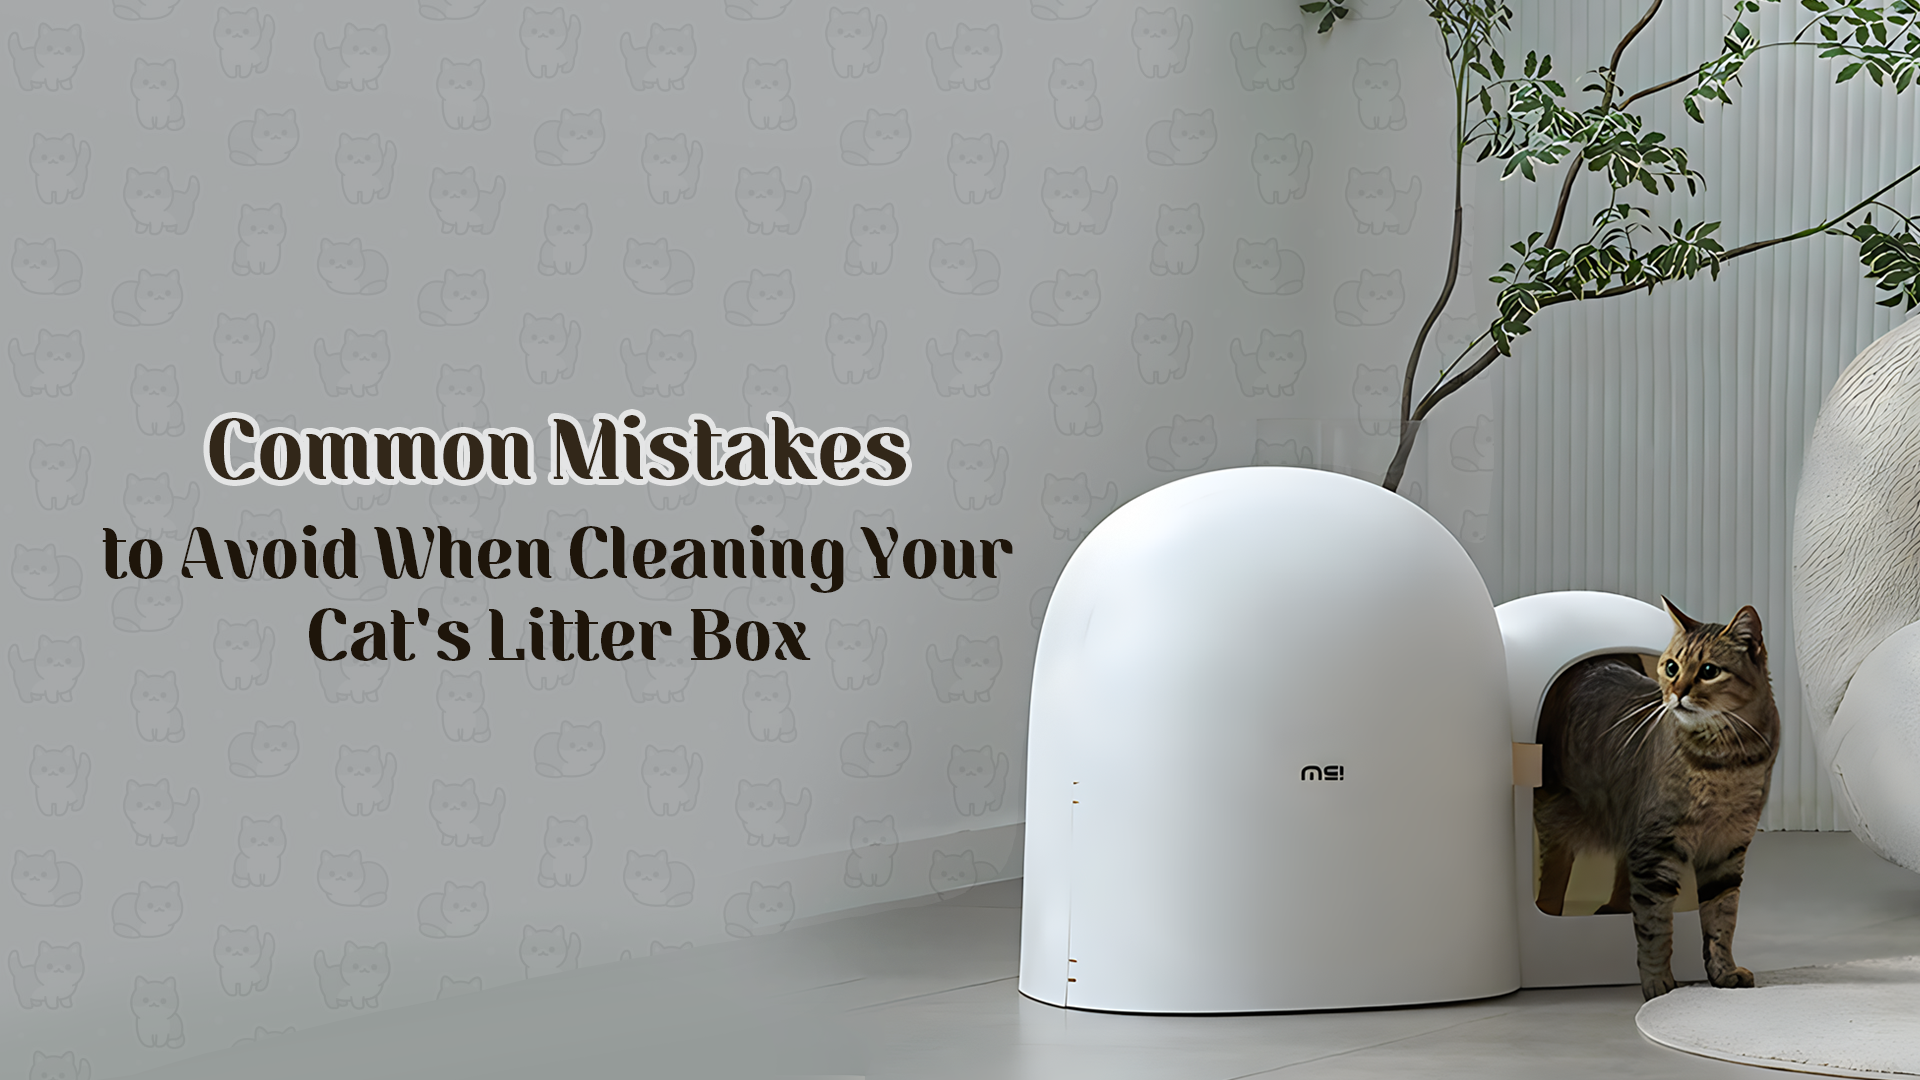 Common Mistakes to Avoid When Cleaning Your Cat's Litter Box